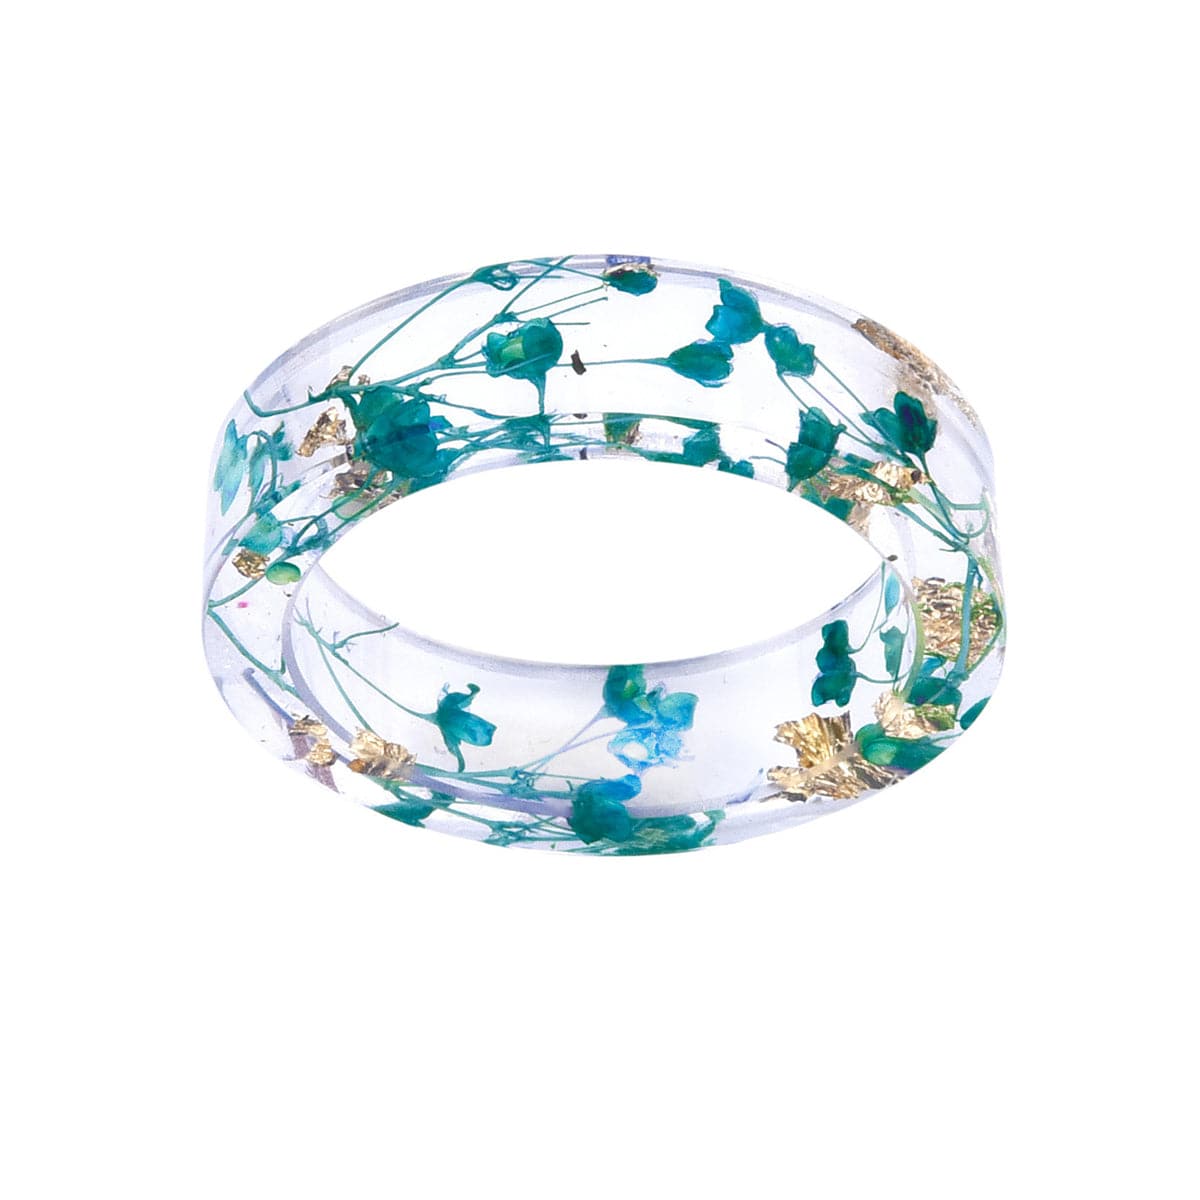 Blue Dried Flower Band Ring